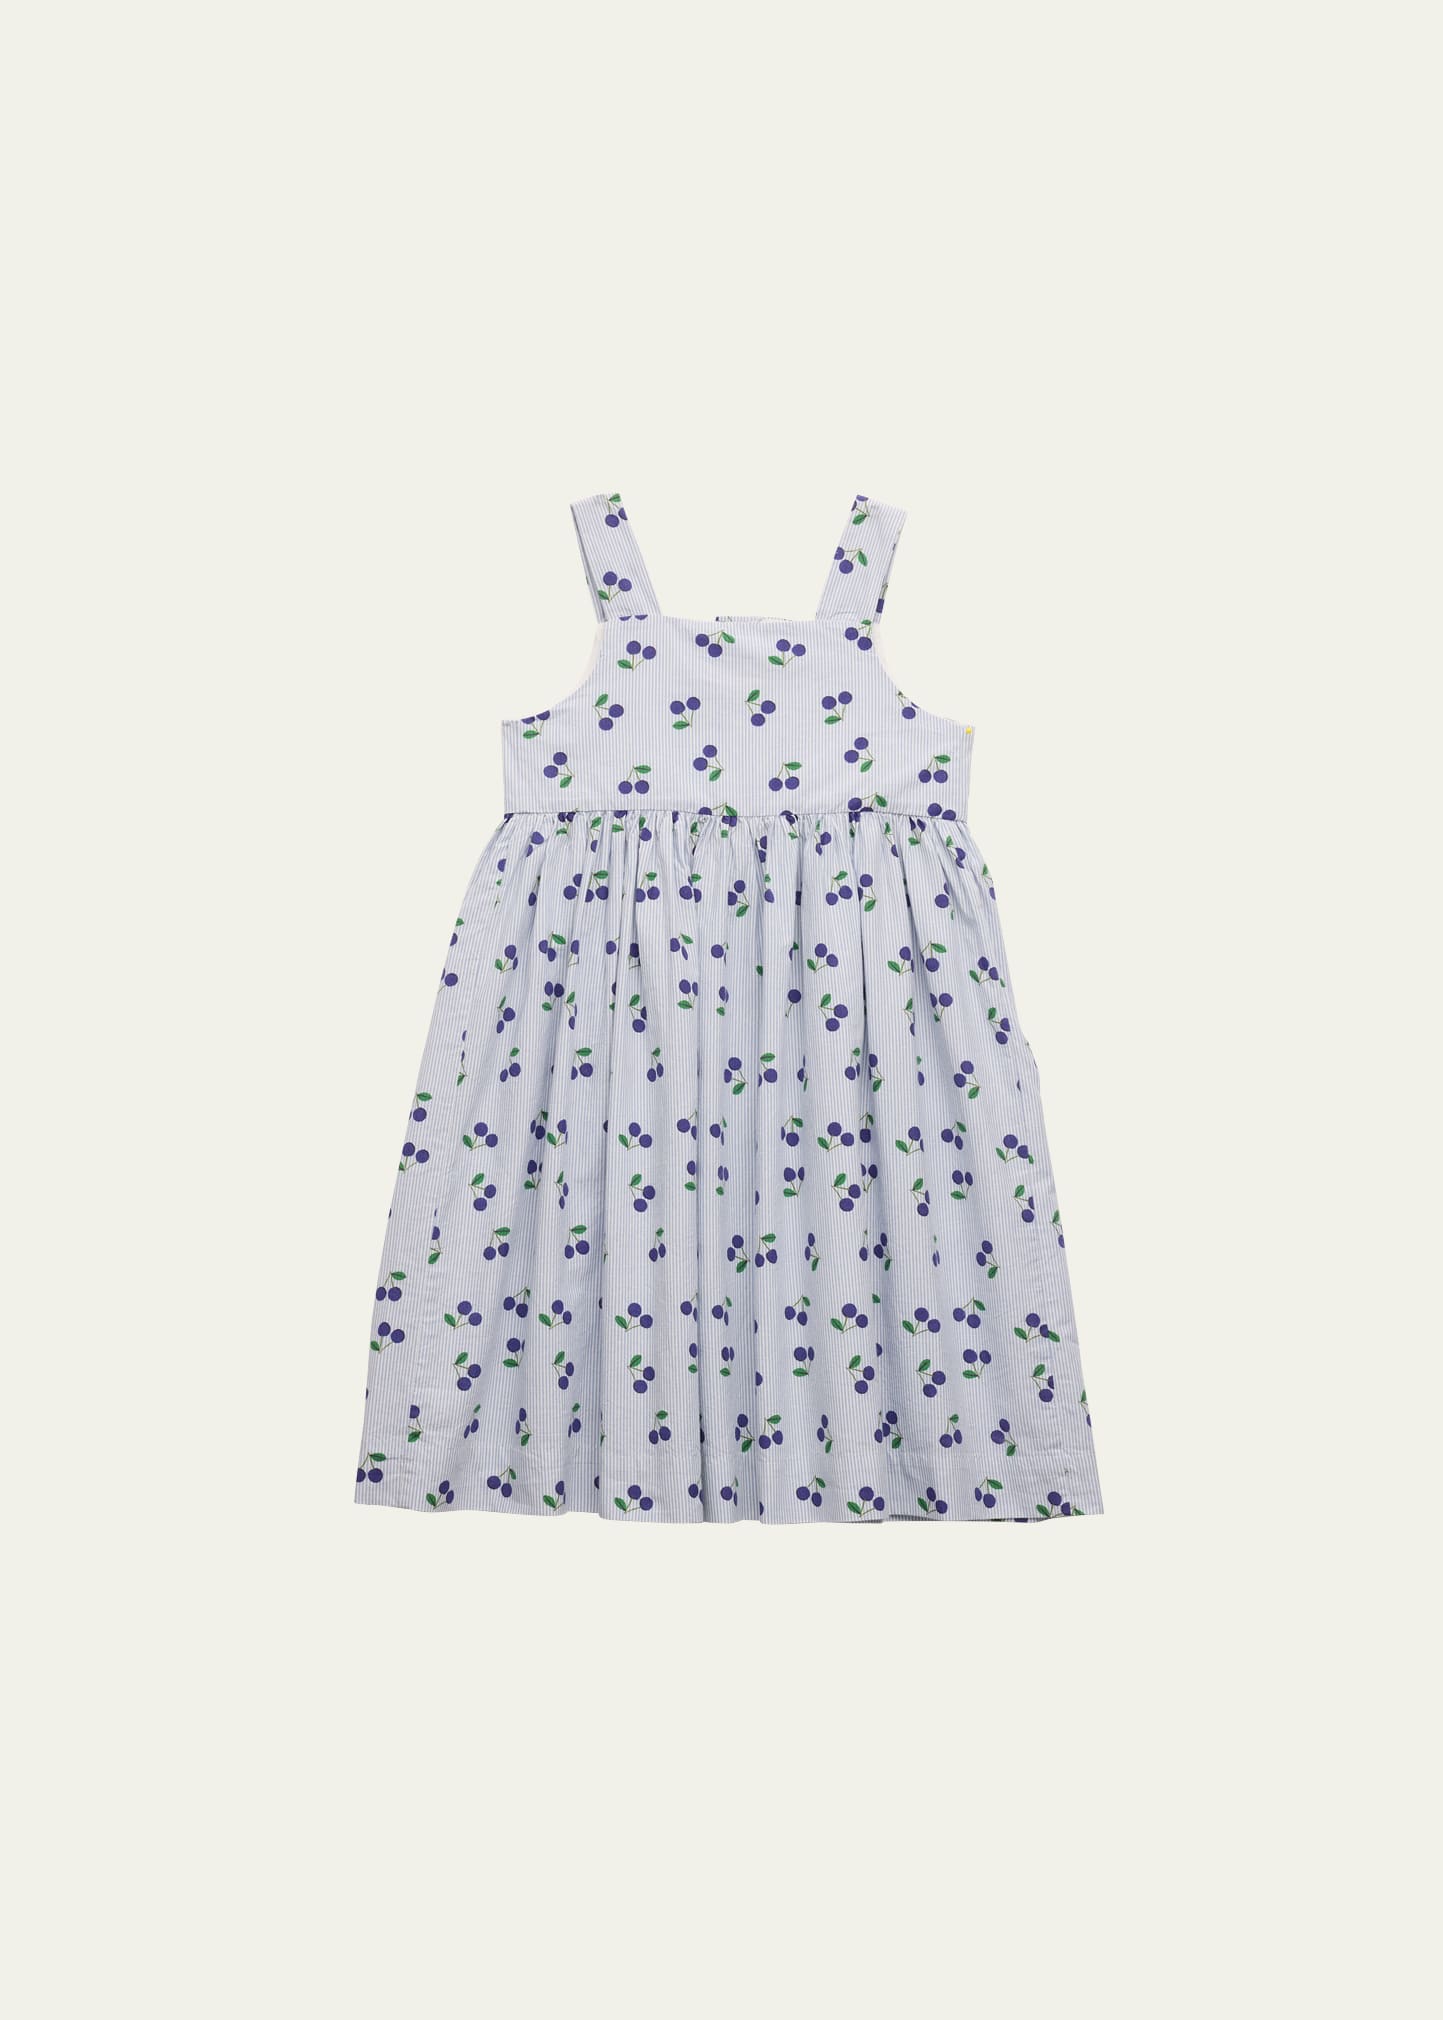 Bonpoint Kids' Girl's Laly Cherry-print Dress In Blue